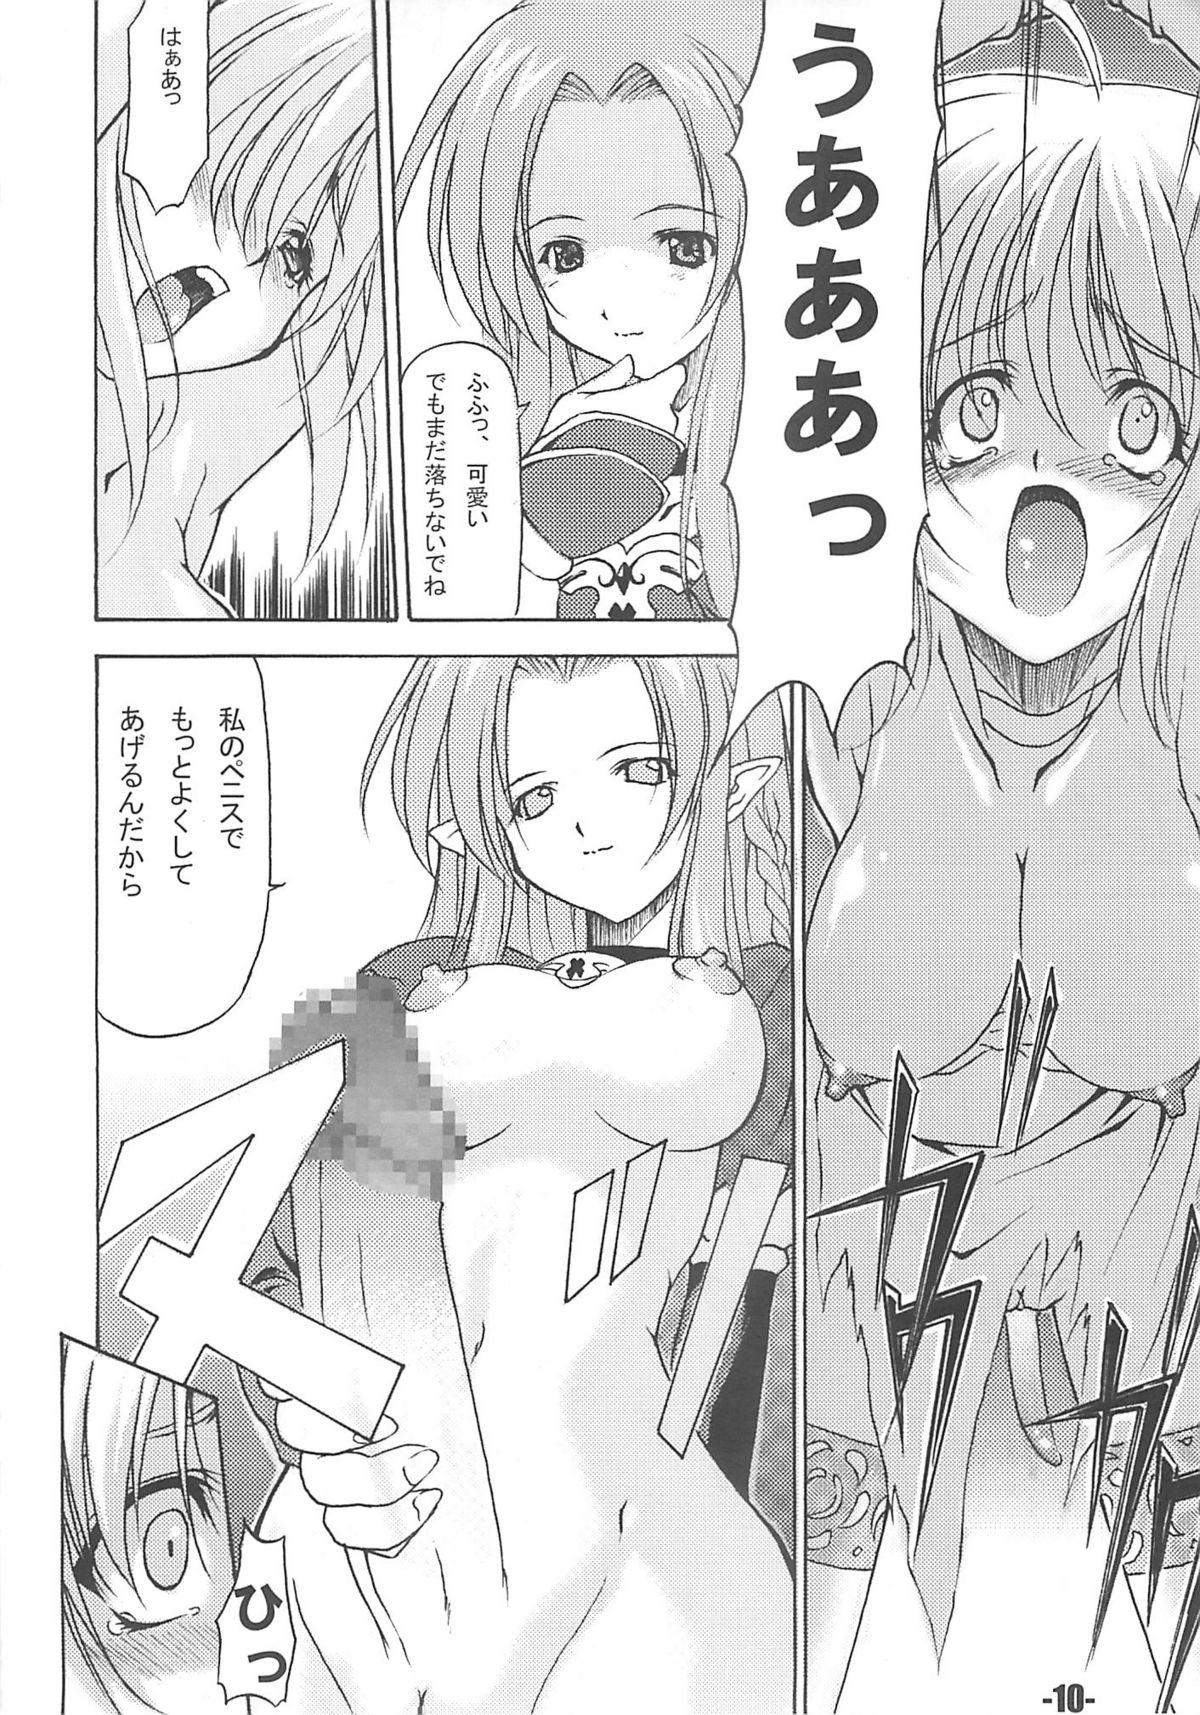 Action EXtra stage vol. 13 - Fate stay night Cruising - Page 9